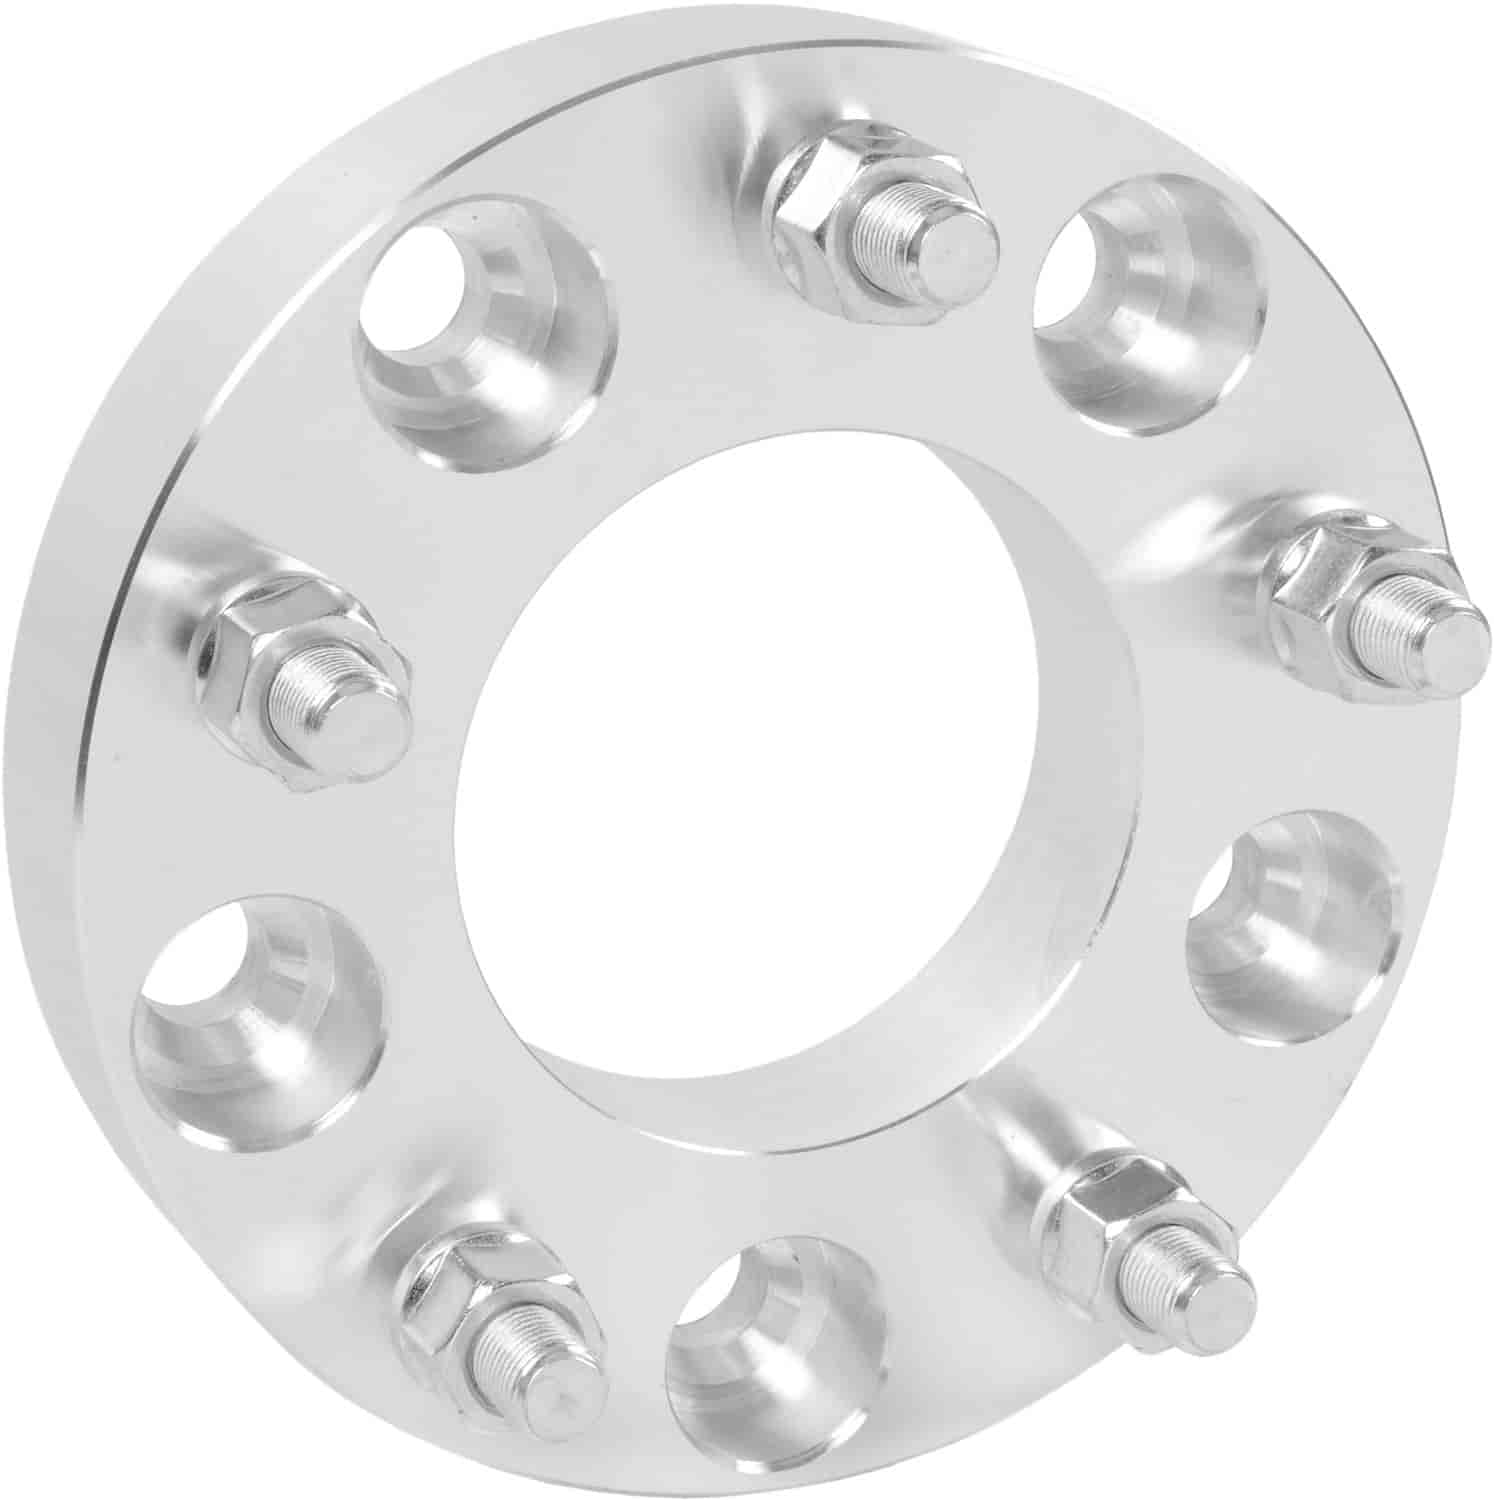 5-Lug Billet Aluminum Wheel Spacer [1.25 in. Thick] 5 x 5.5 in. Bolt Pattern